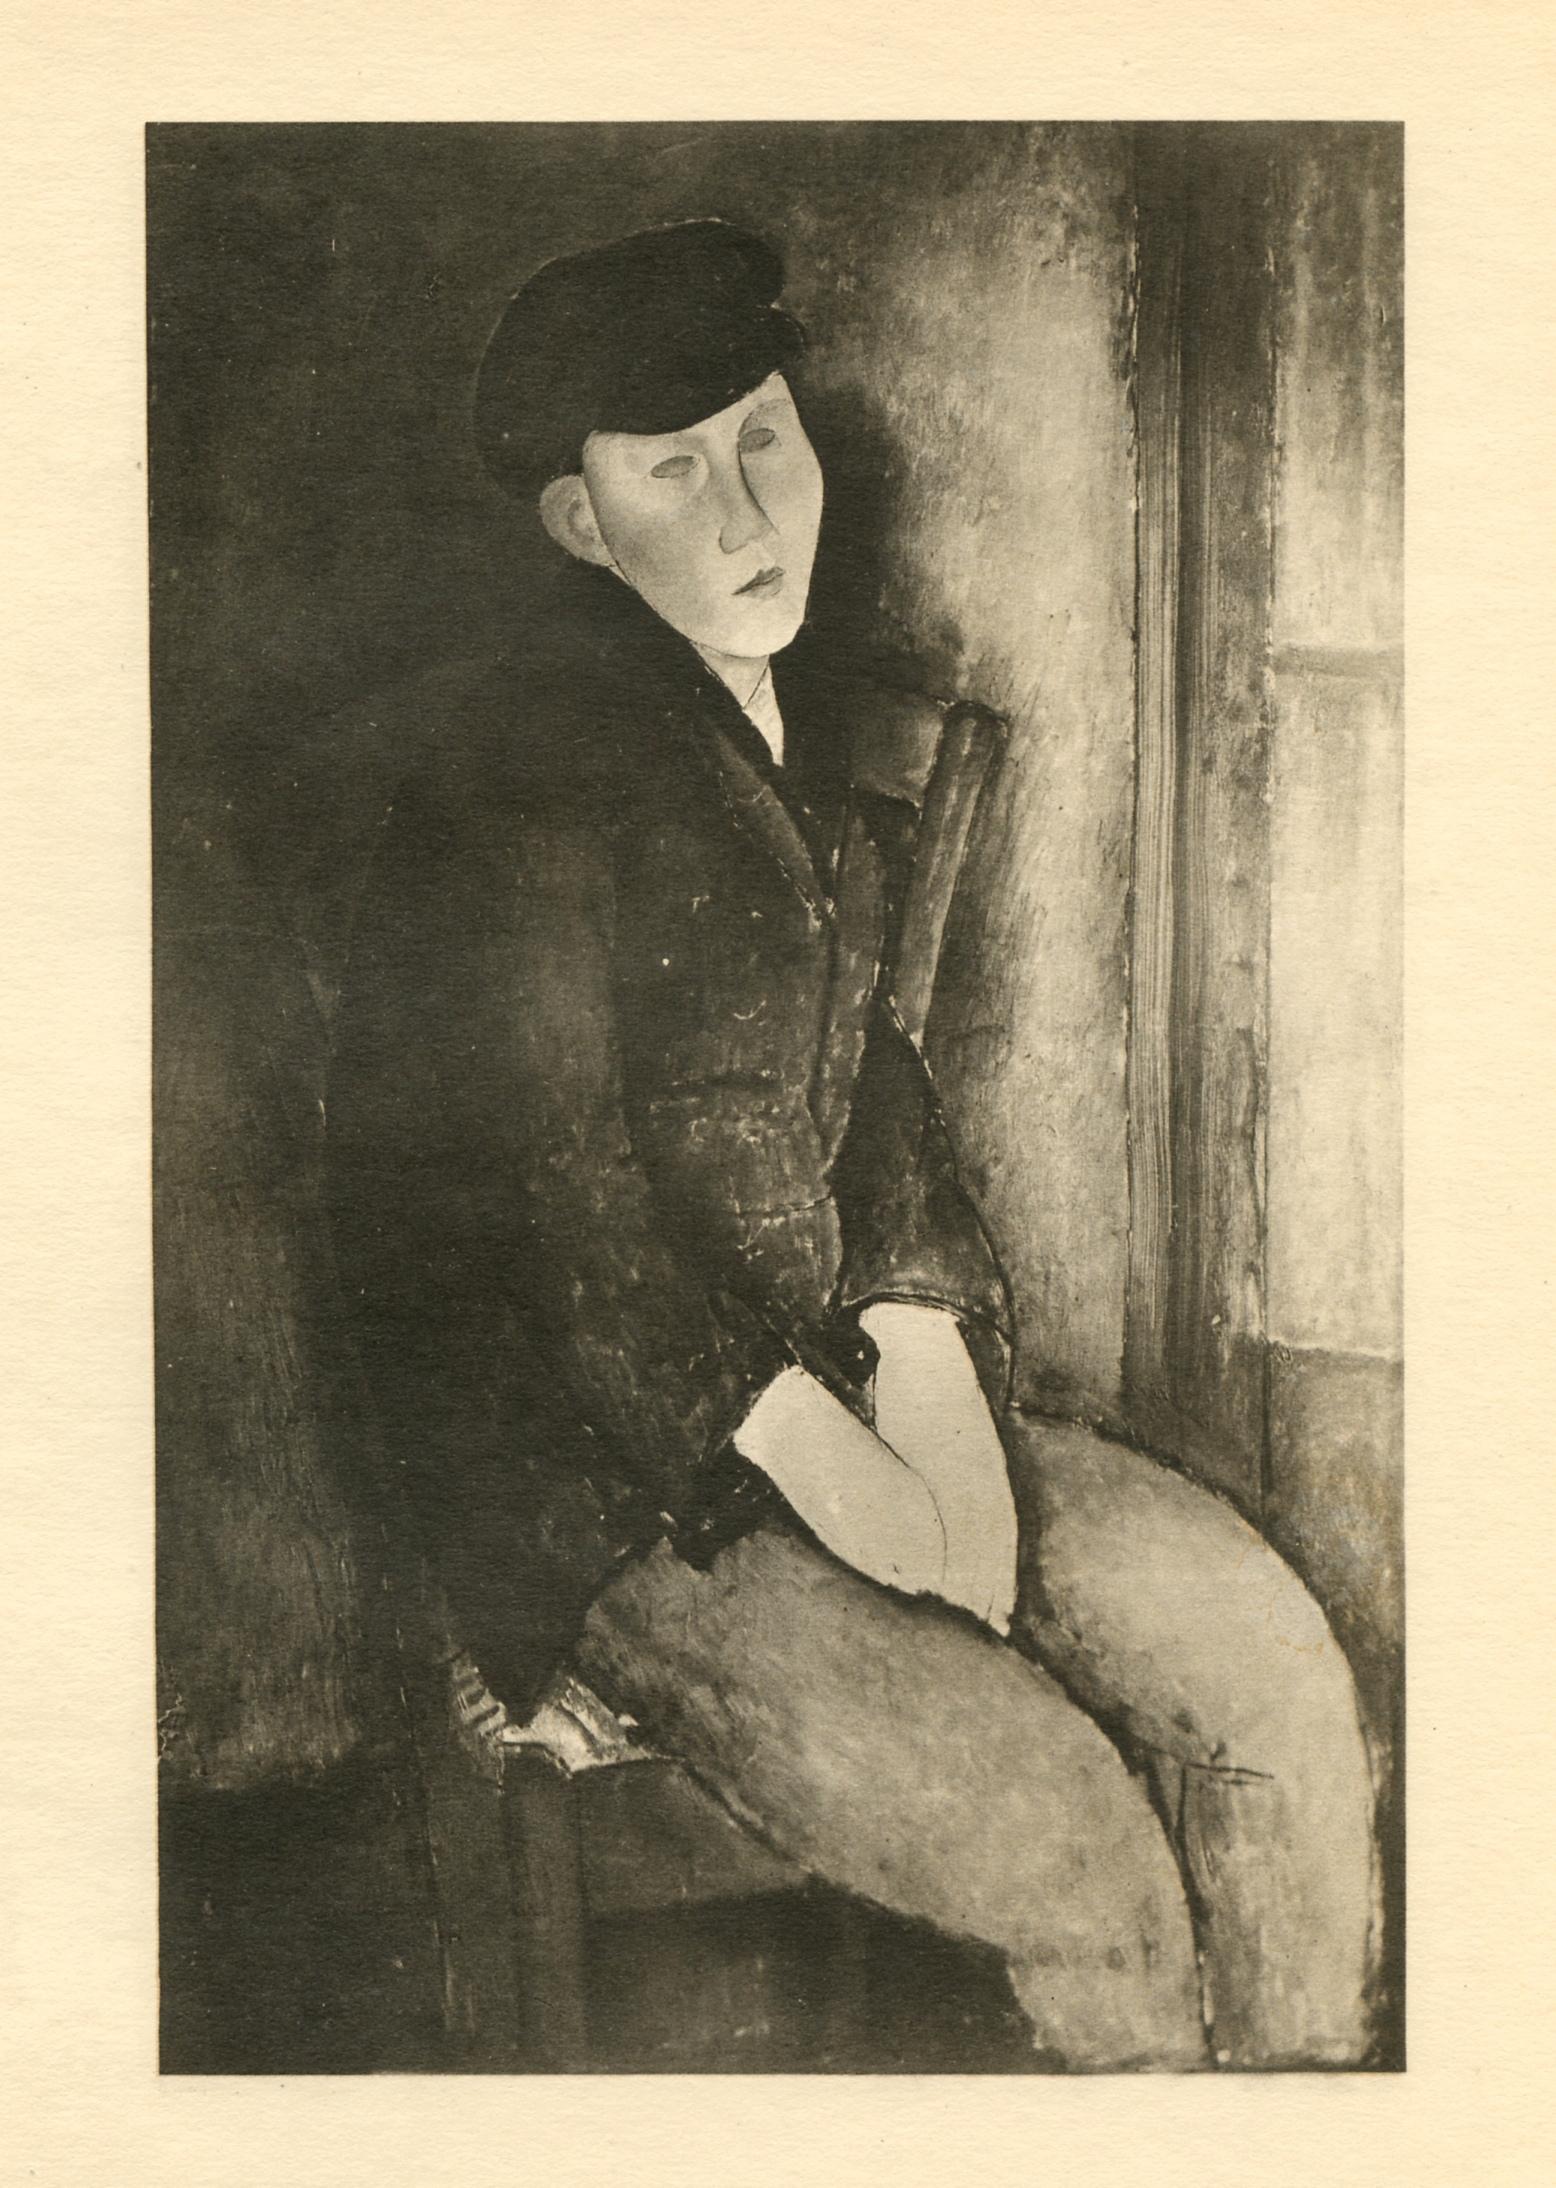 Medium: collotype (after the painting). Printed in 1926 at the Leon Marotte atelier and published in an edition of 1000 by Editions des Quatre Chemins. Image size: 8 x 5 1/4 inches (207 x 133 mm). Sheet size: 11 x 8 1/4 inches (280 x 210 mm). Not